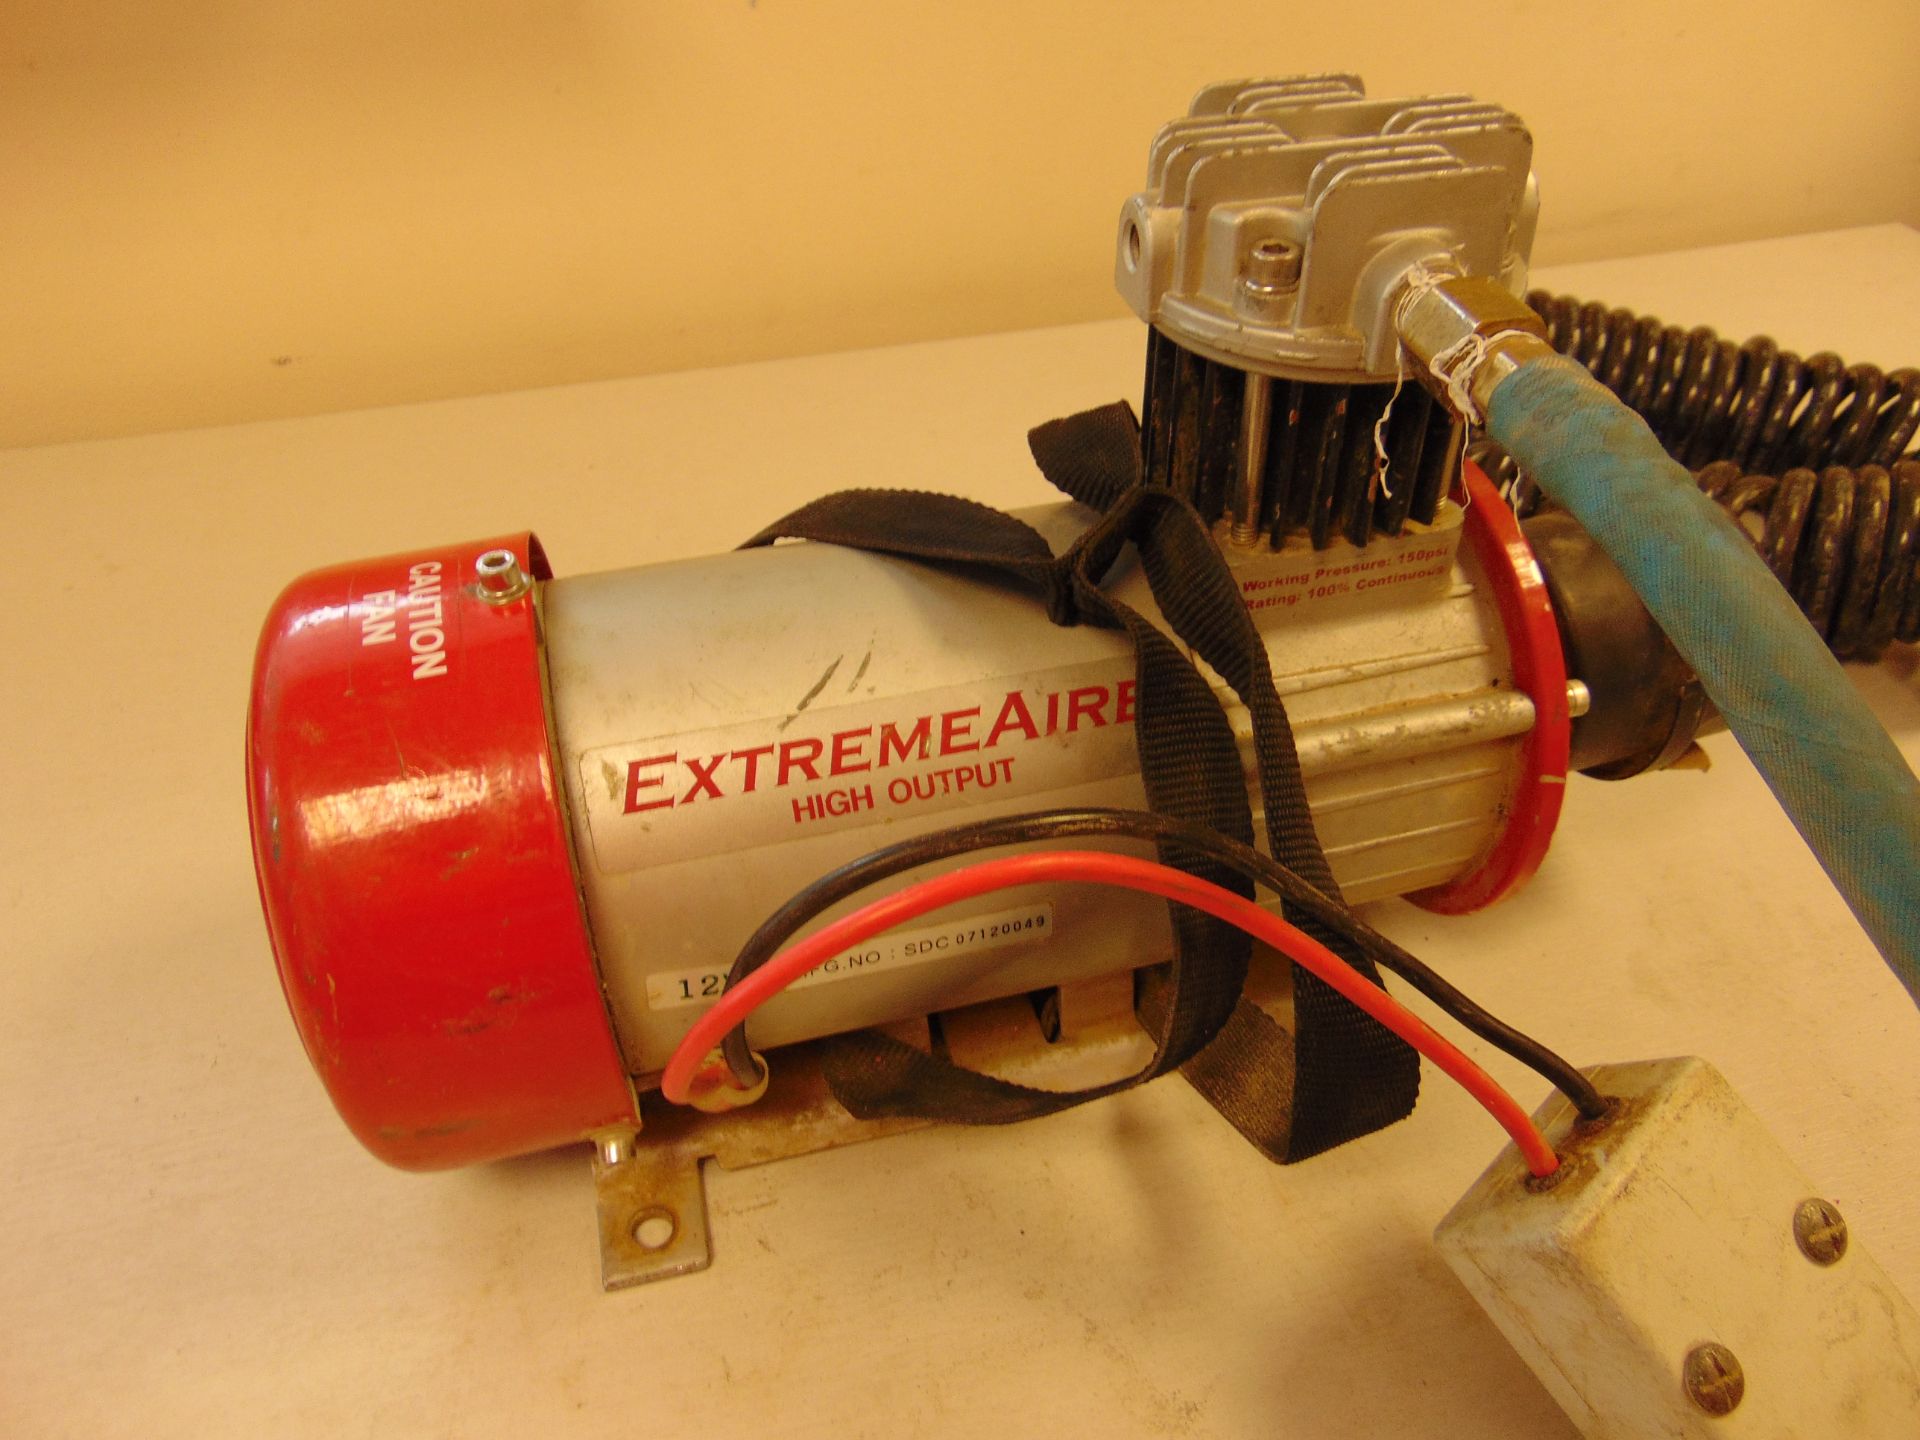 Extreme Aire - High Output Compressor. - Image 3 of 7